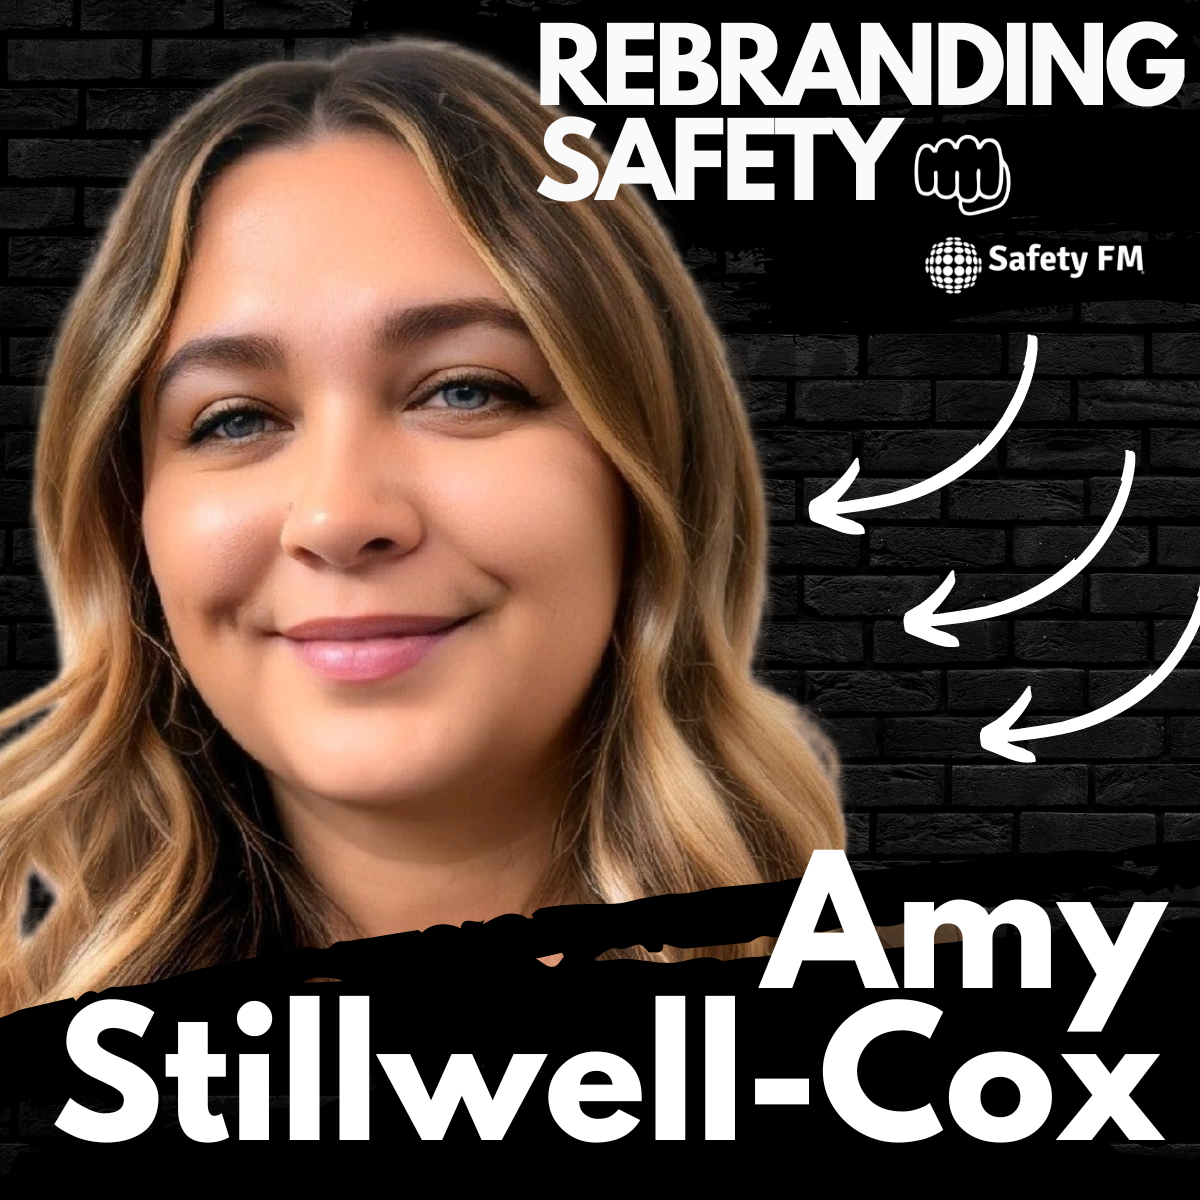 The  state of the safety profession and the importance of community - The Rebranding Safety Show with Amy Stillwell-Cox